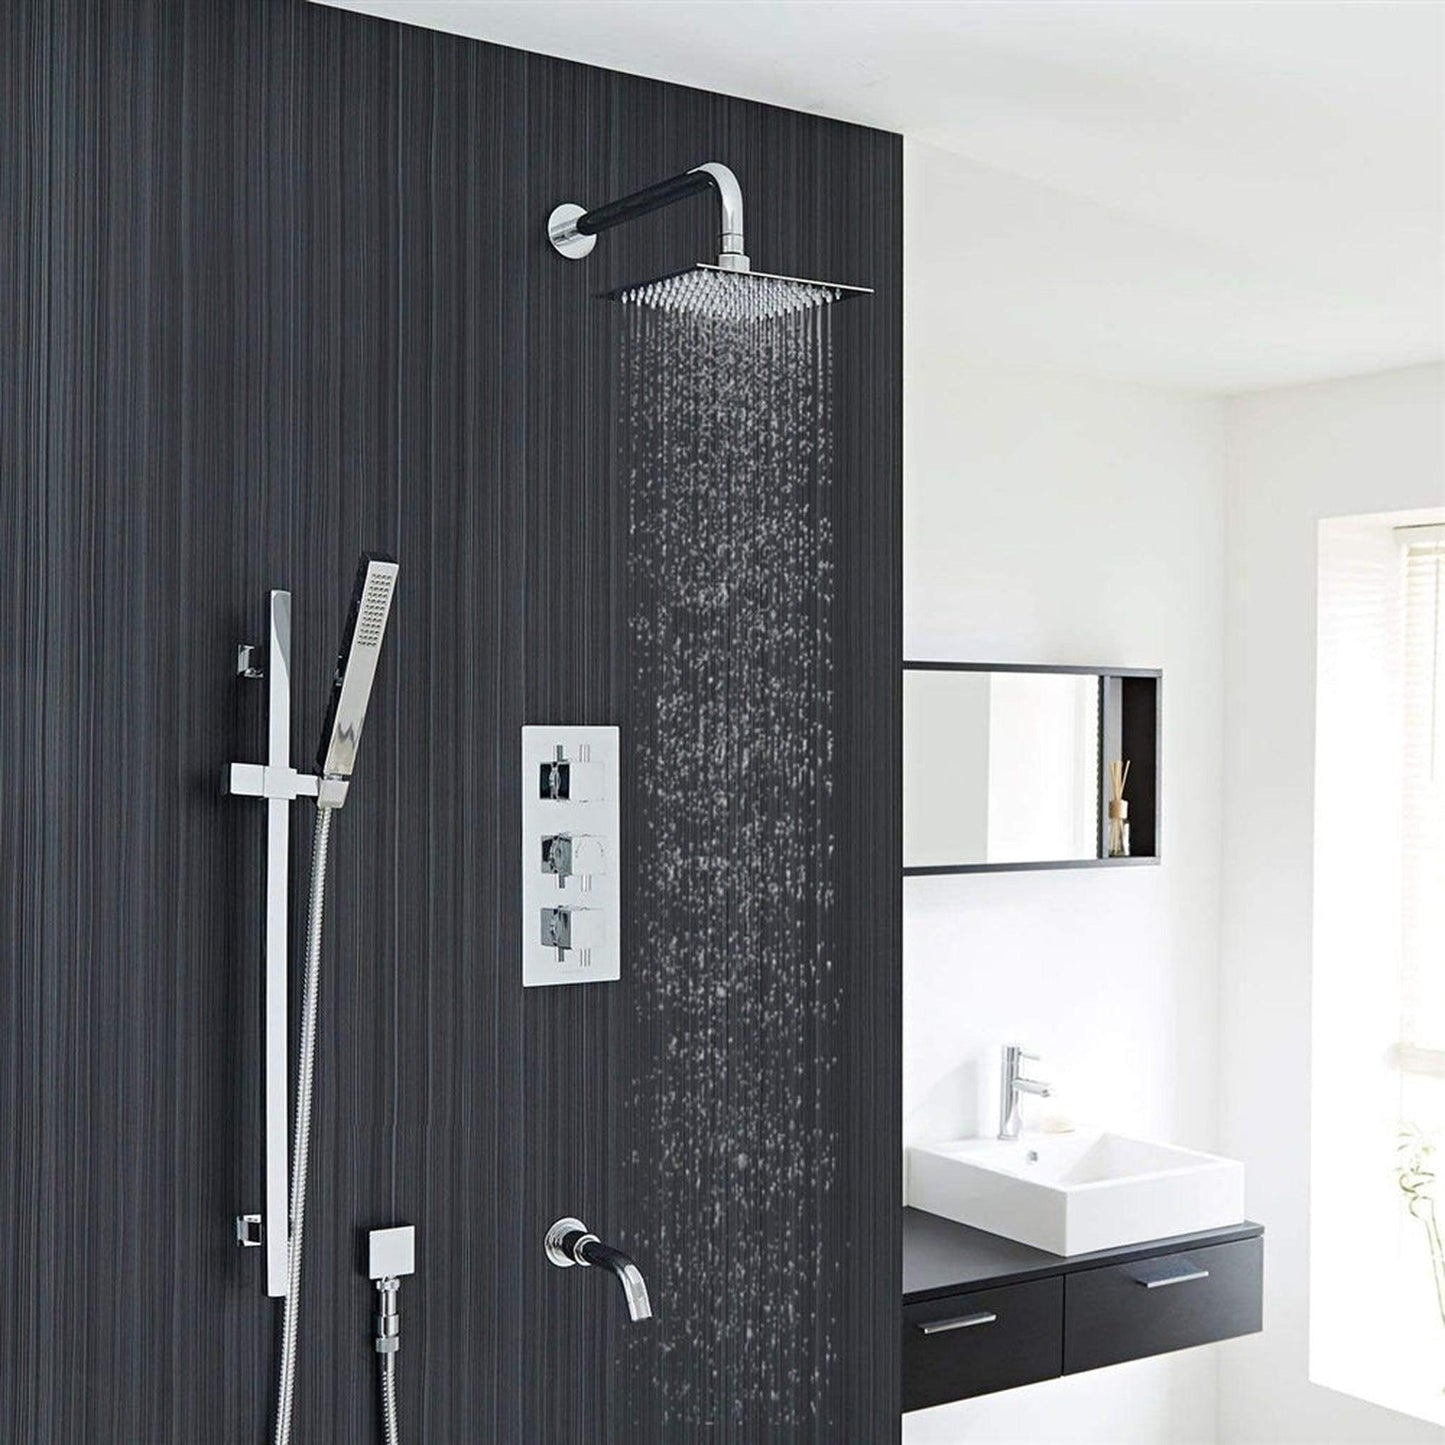 Fontana Liverpool Chrome 12" Wall-Mounted Thermostatic Rainfall Shower System With Hand Shower and Without Water Power LED Lights